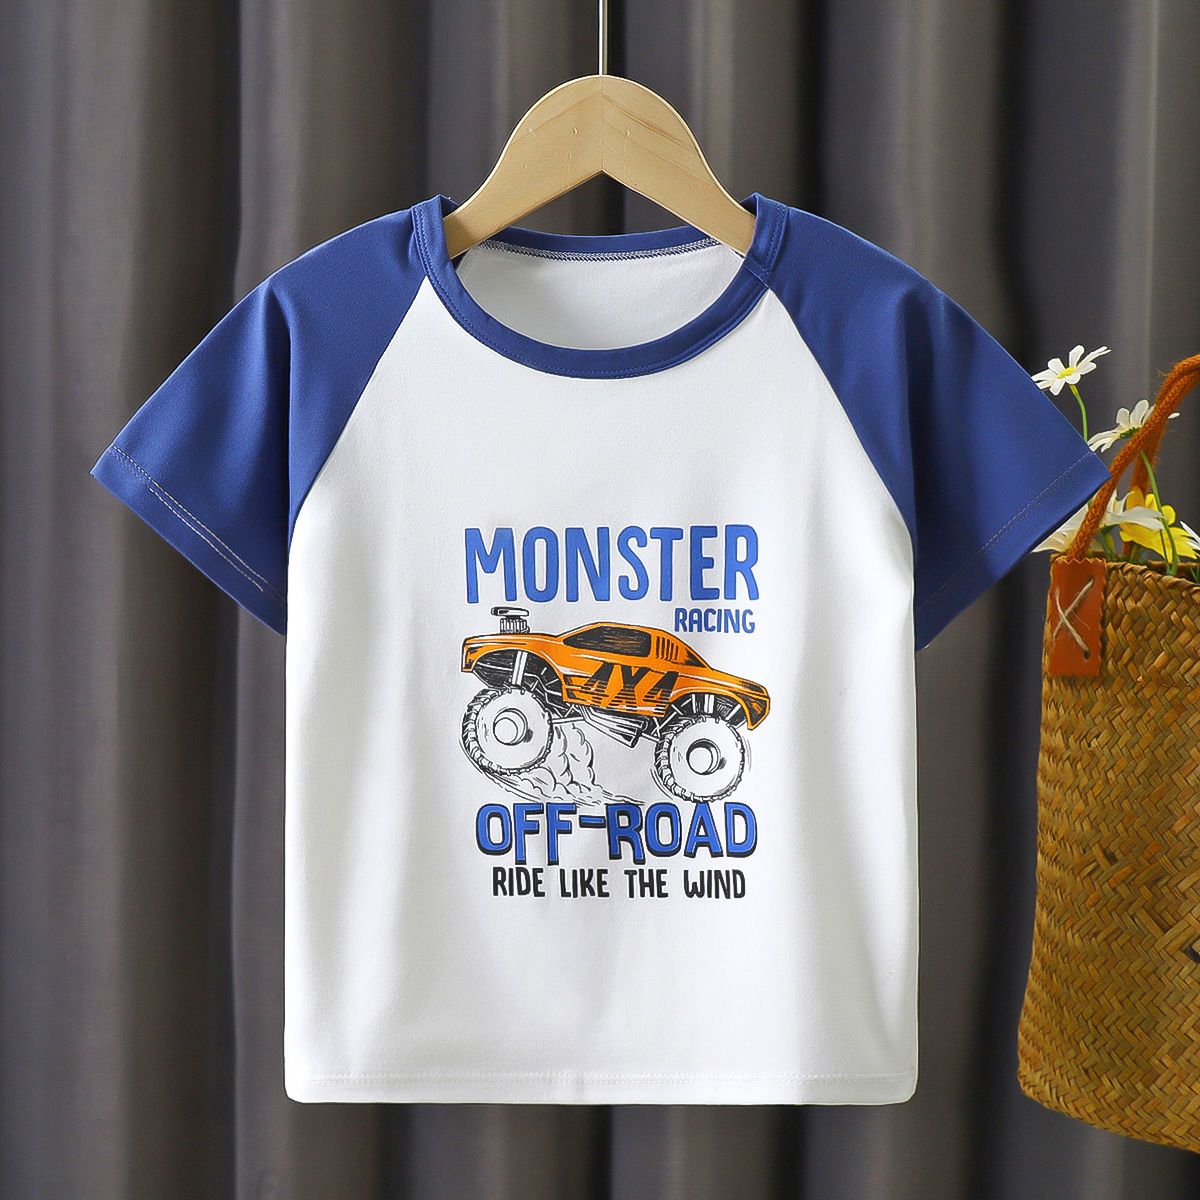 Children's summer short-sleeved T-shirt baby summer clothes for big children's tops baby thin section half-sleeved 1-9 years old boys and girls clothes